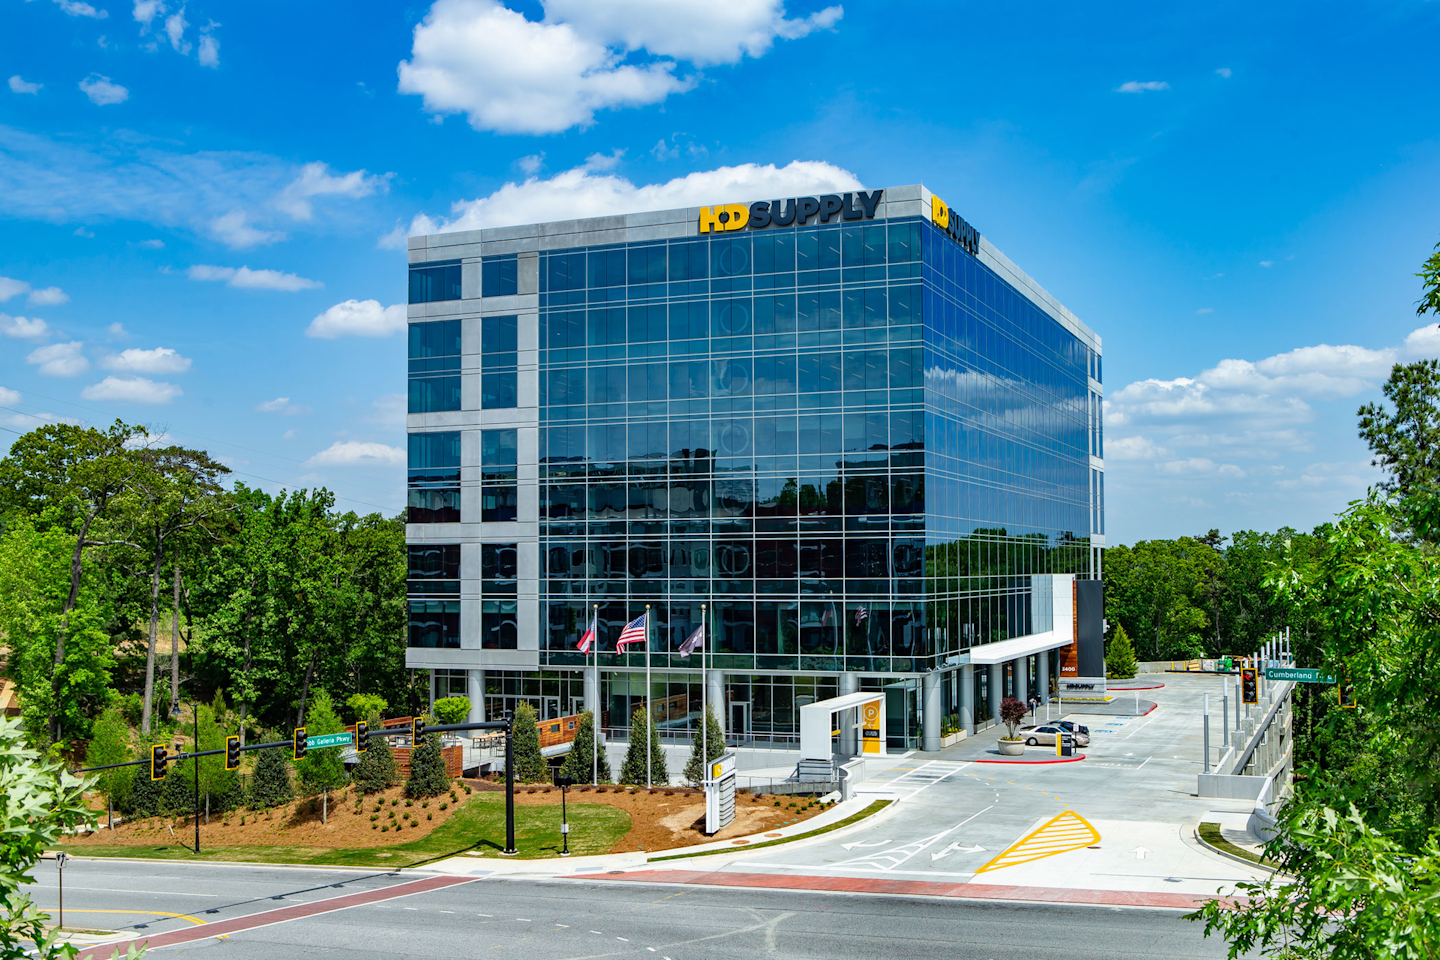 Hd Supply Officially Opens New Atlanta Headquarters Industrial Distribution